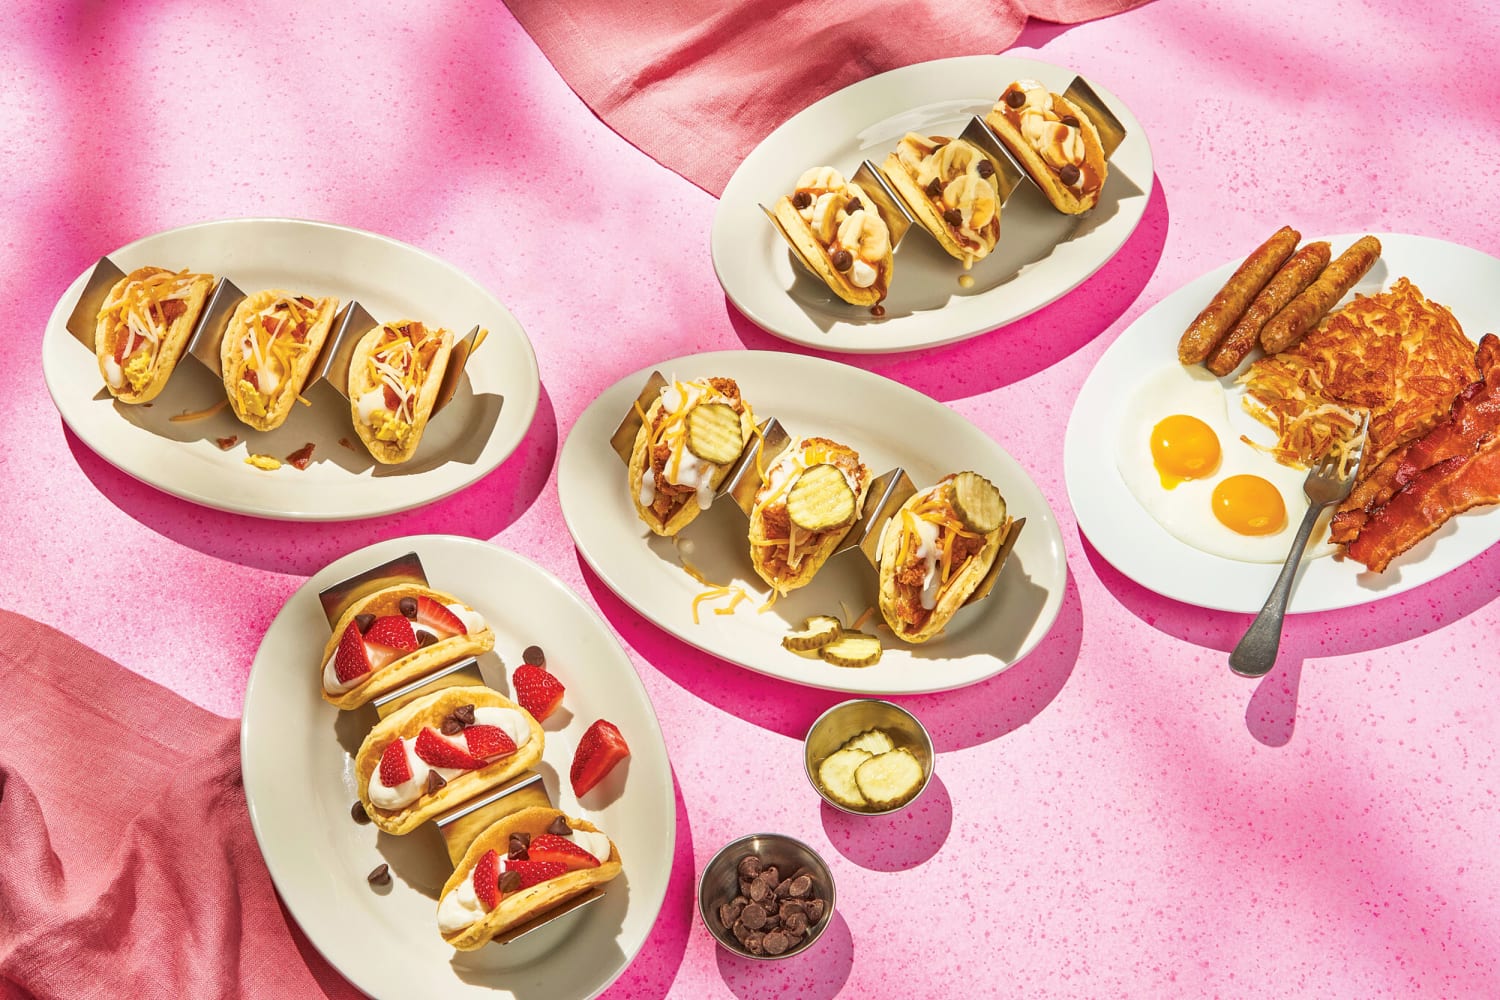 IHOP® Introduces New Sweet and Savory Pancake Tacos to Menus Nationwide